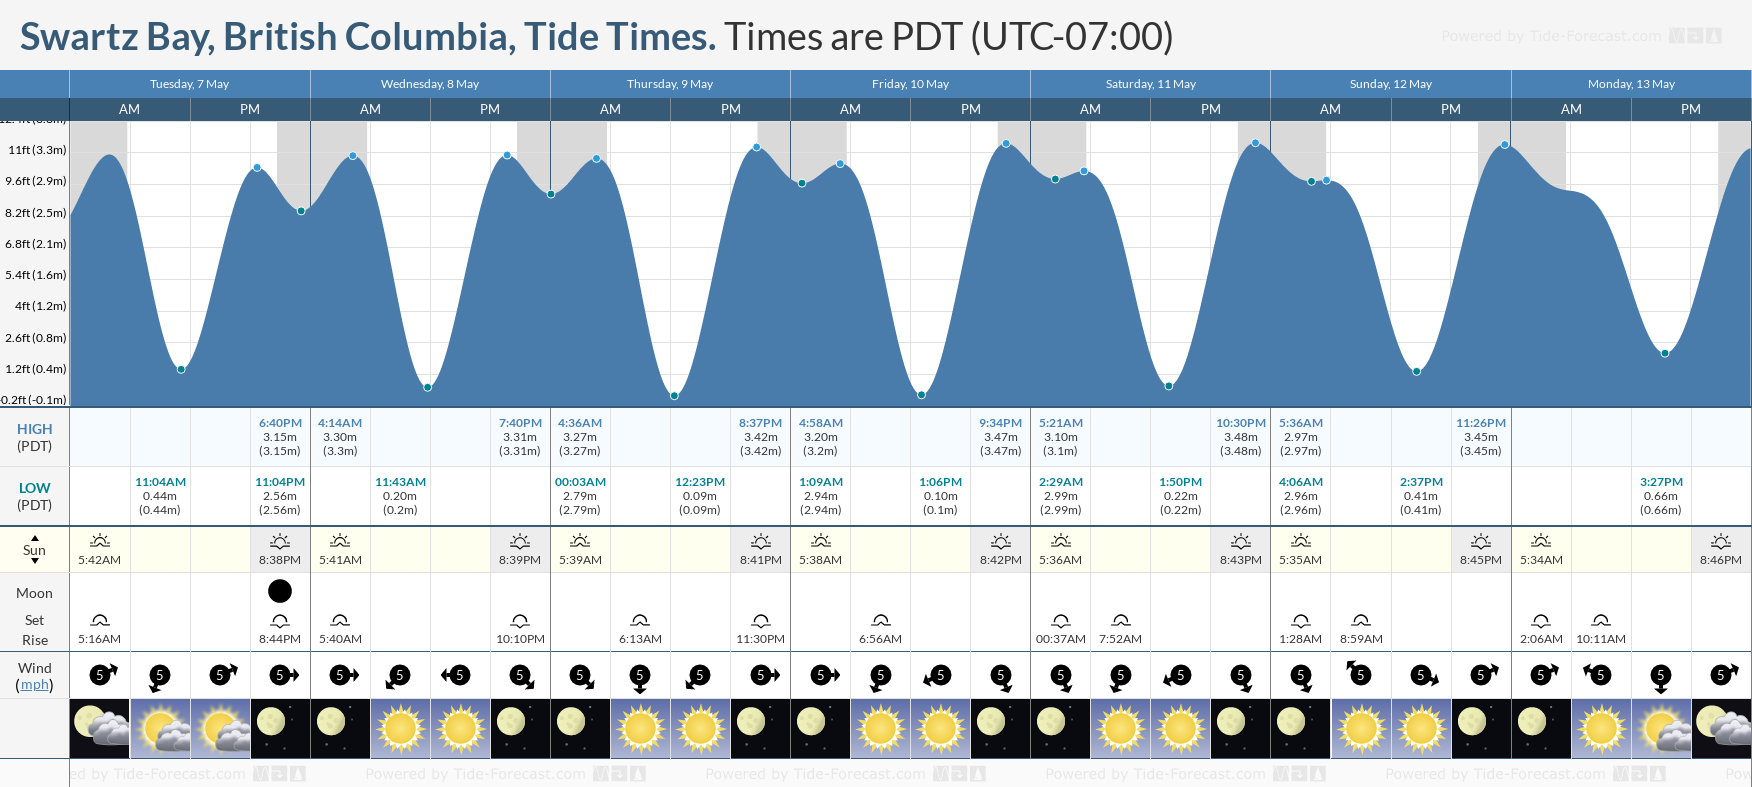 Swartz Bay, British Columbia Tide Chart including high and low tide tide times for the next 7 days